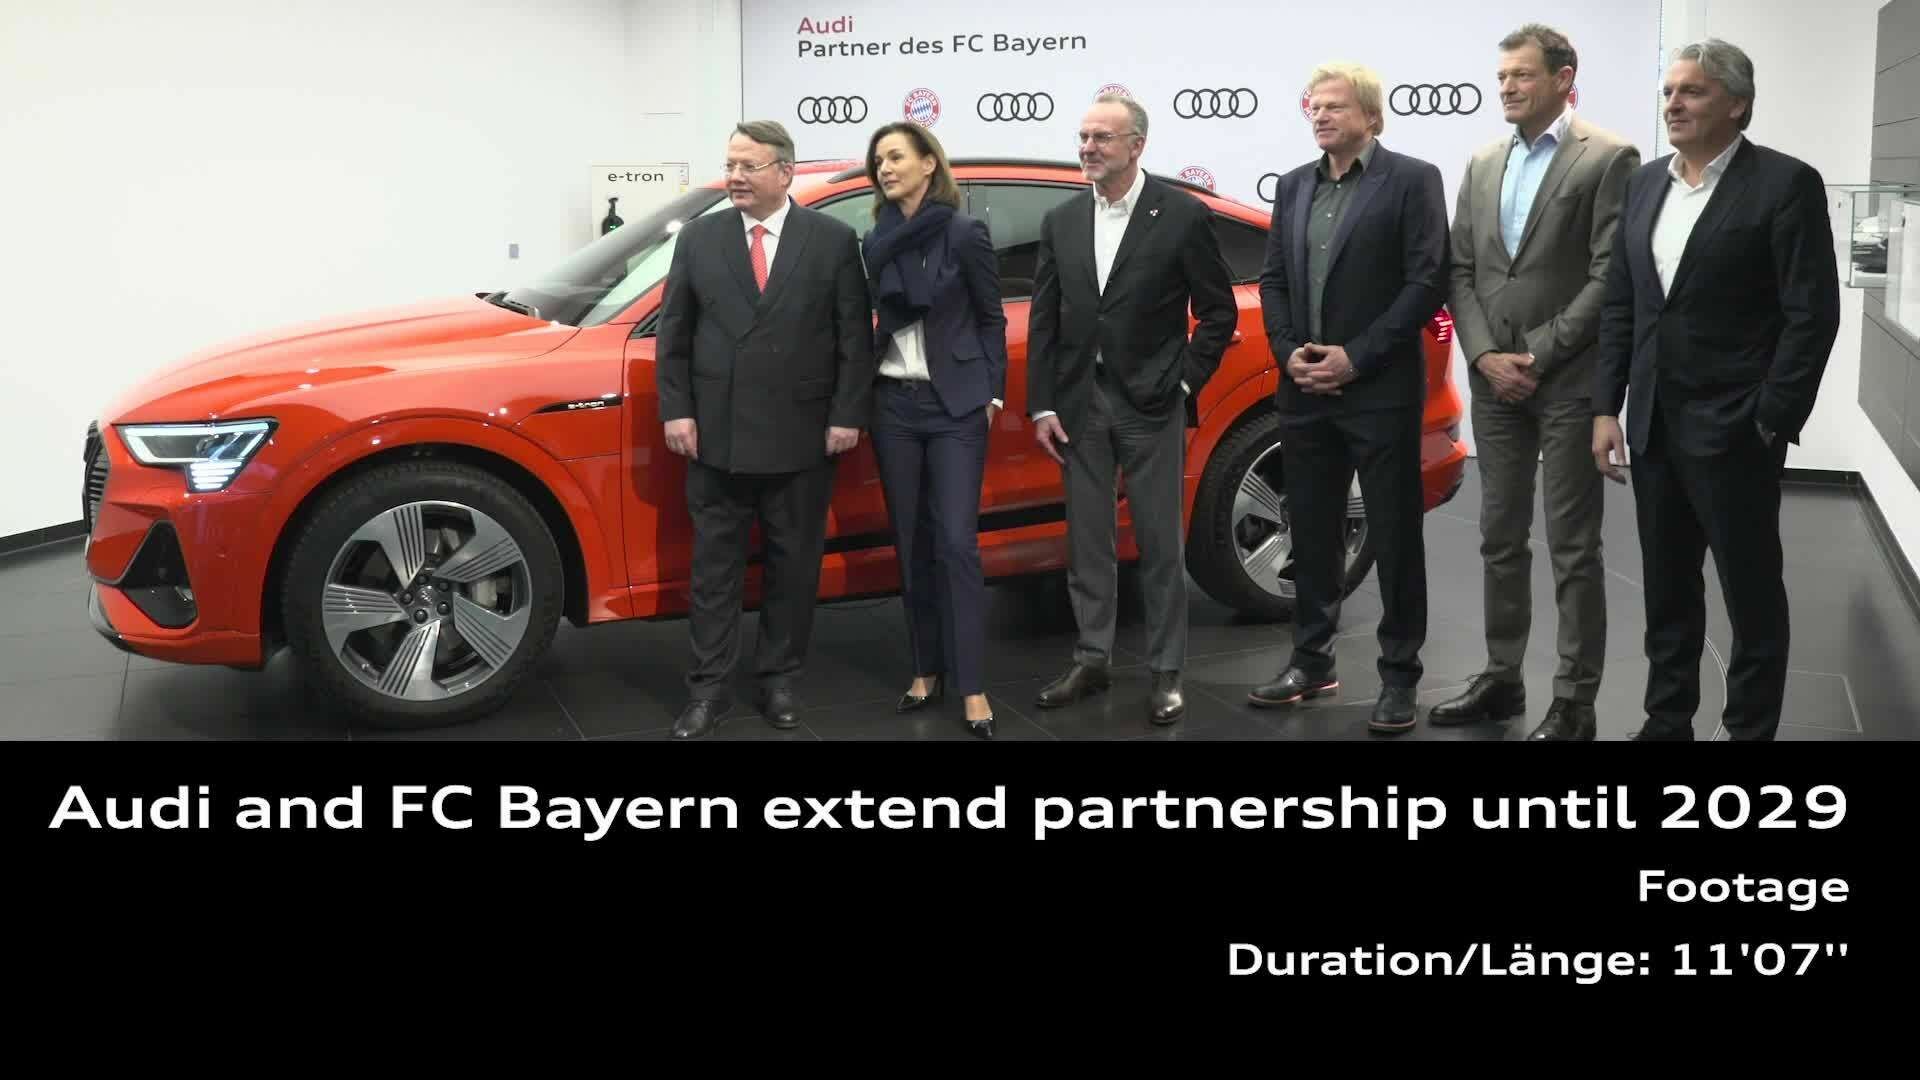 Extended partnership with the FC Bayern until 2029 (Footage)